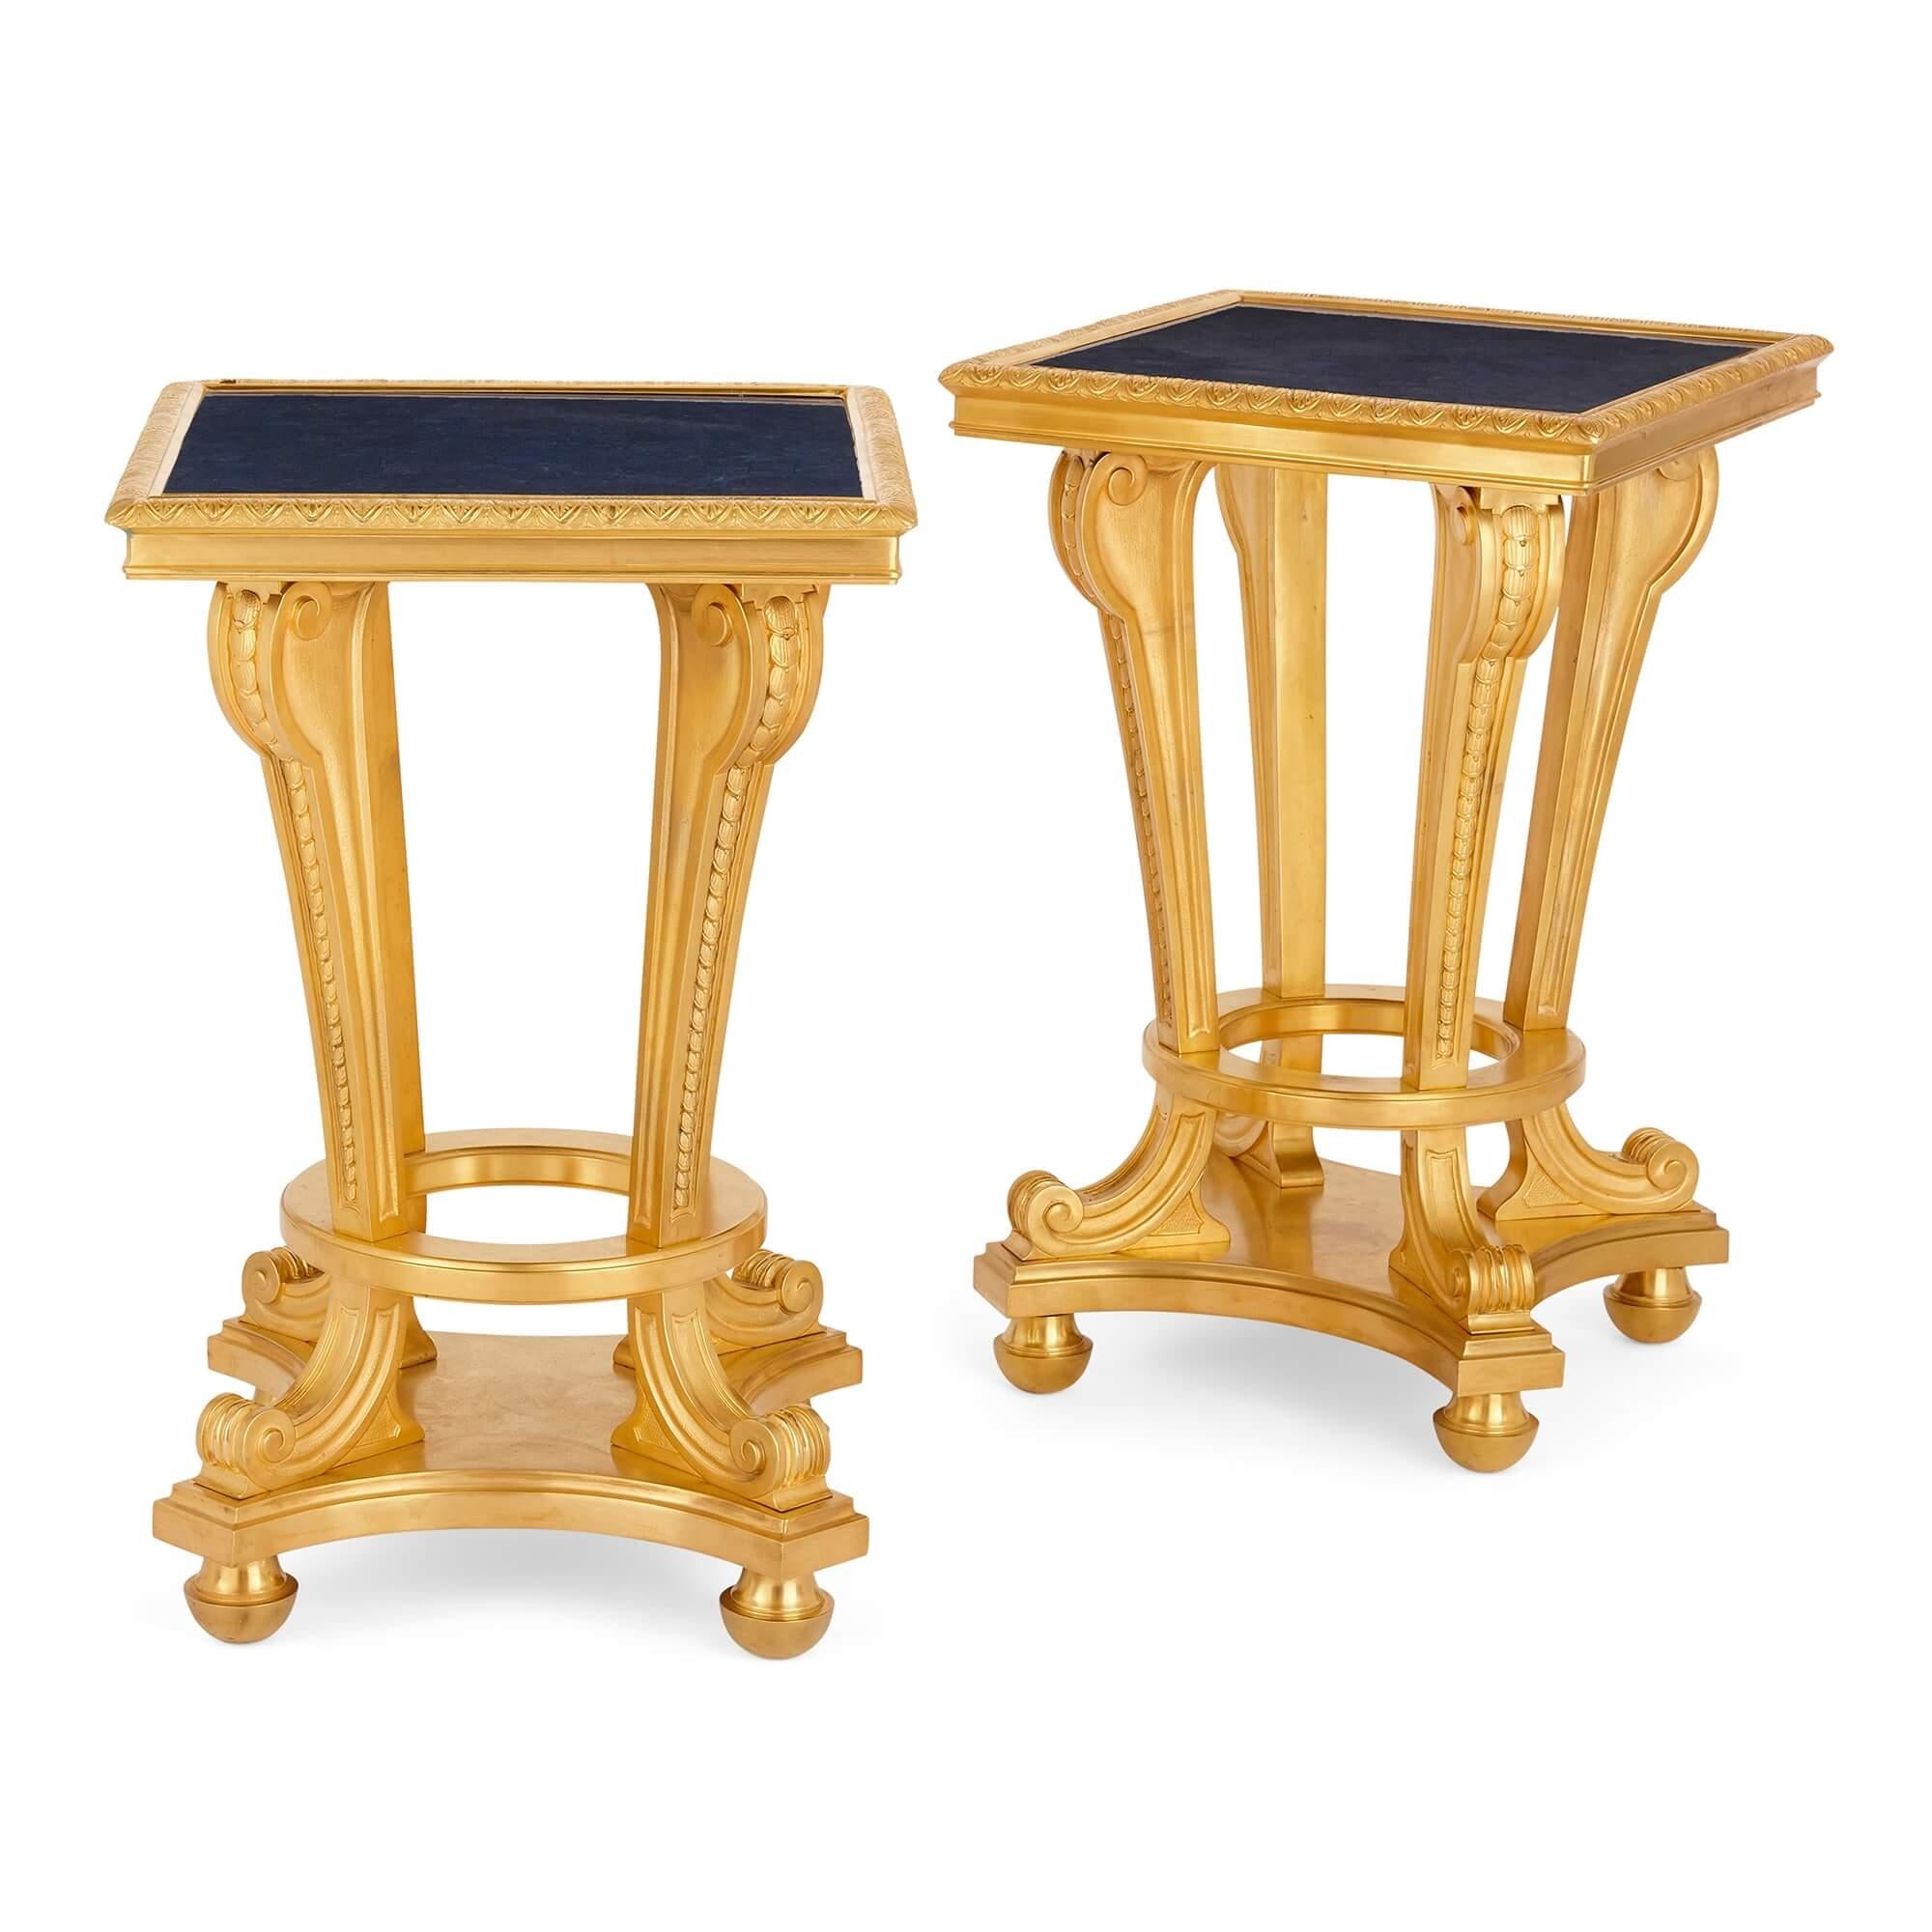 Pair of Large Gilt-Bronze Mounted Sèvres-style Porcelain Vases with Pedestals For Sale 5